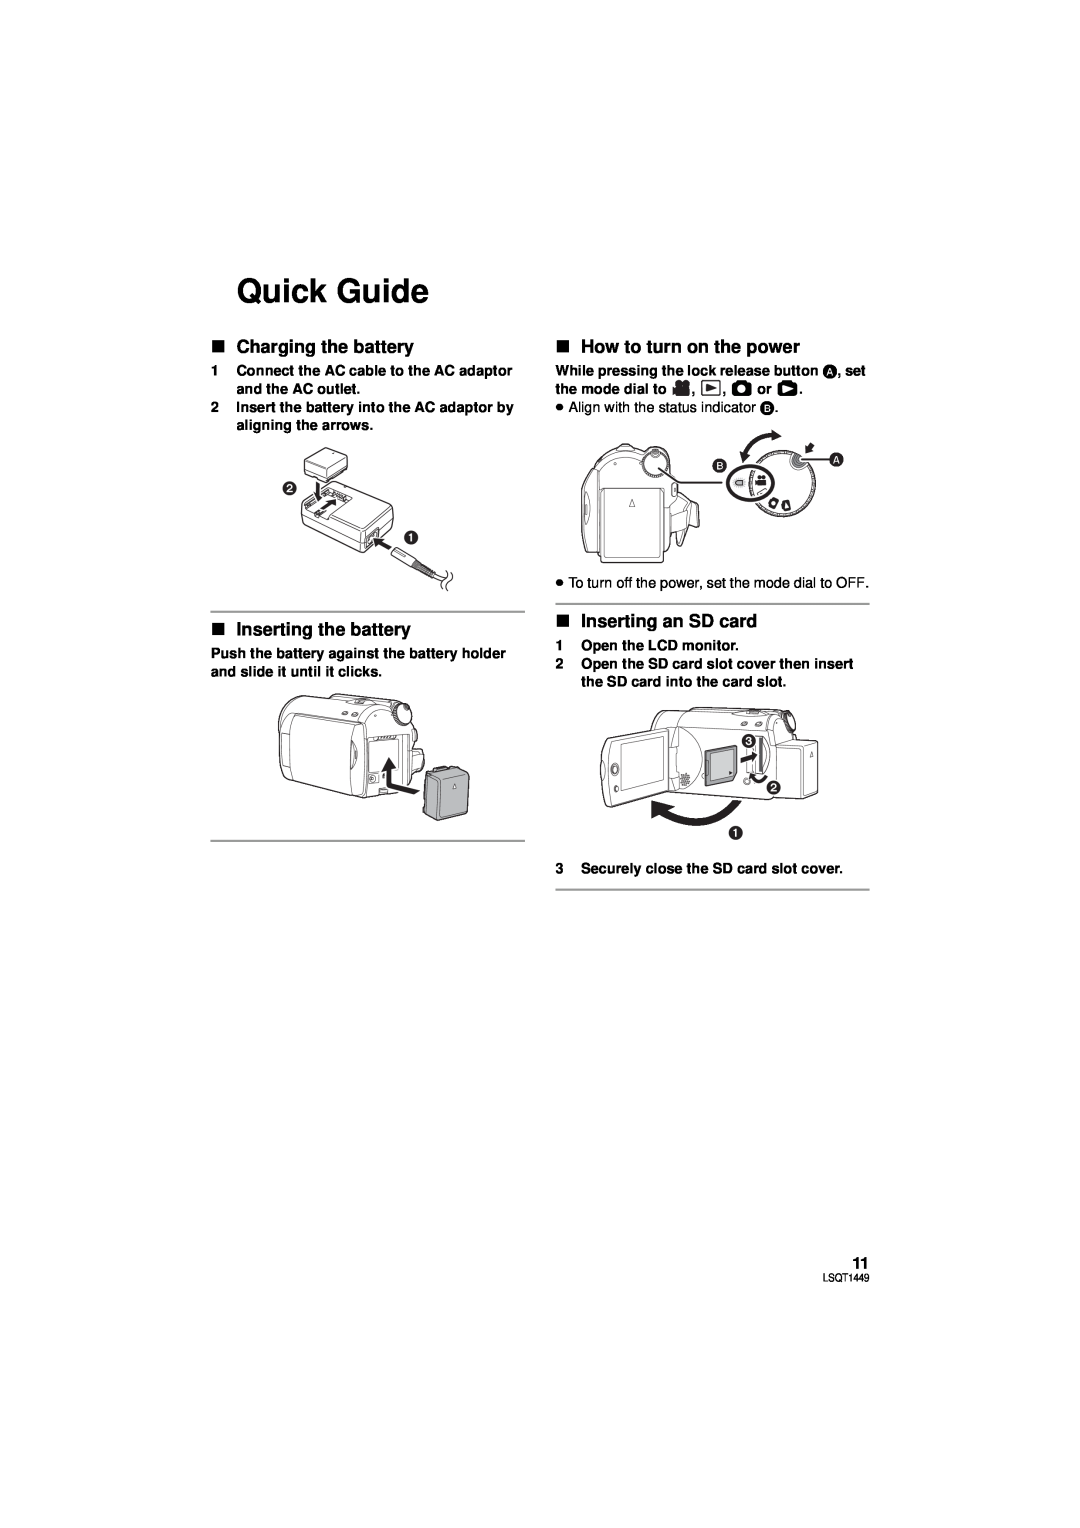 Panasonic SDR-H80PC, SDR-H90P Quick Guide, ∫ Charging the battery, ∫ Inserting the battery, ∫ How to turn on the power 